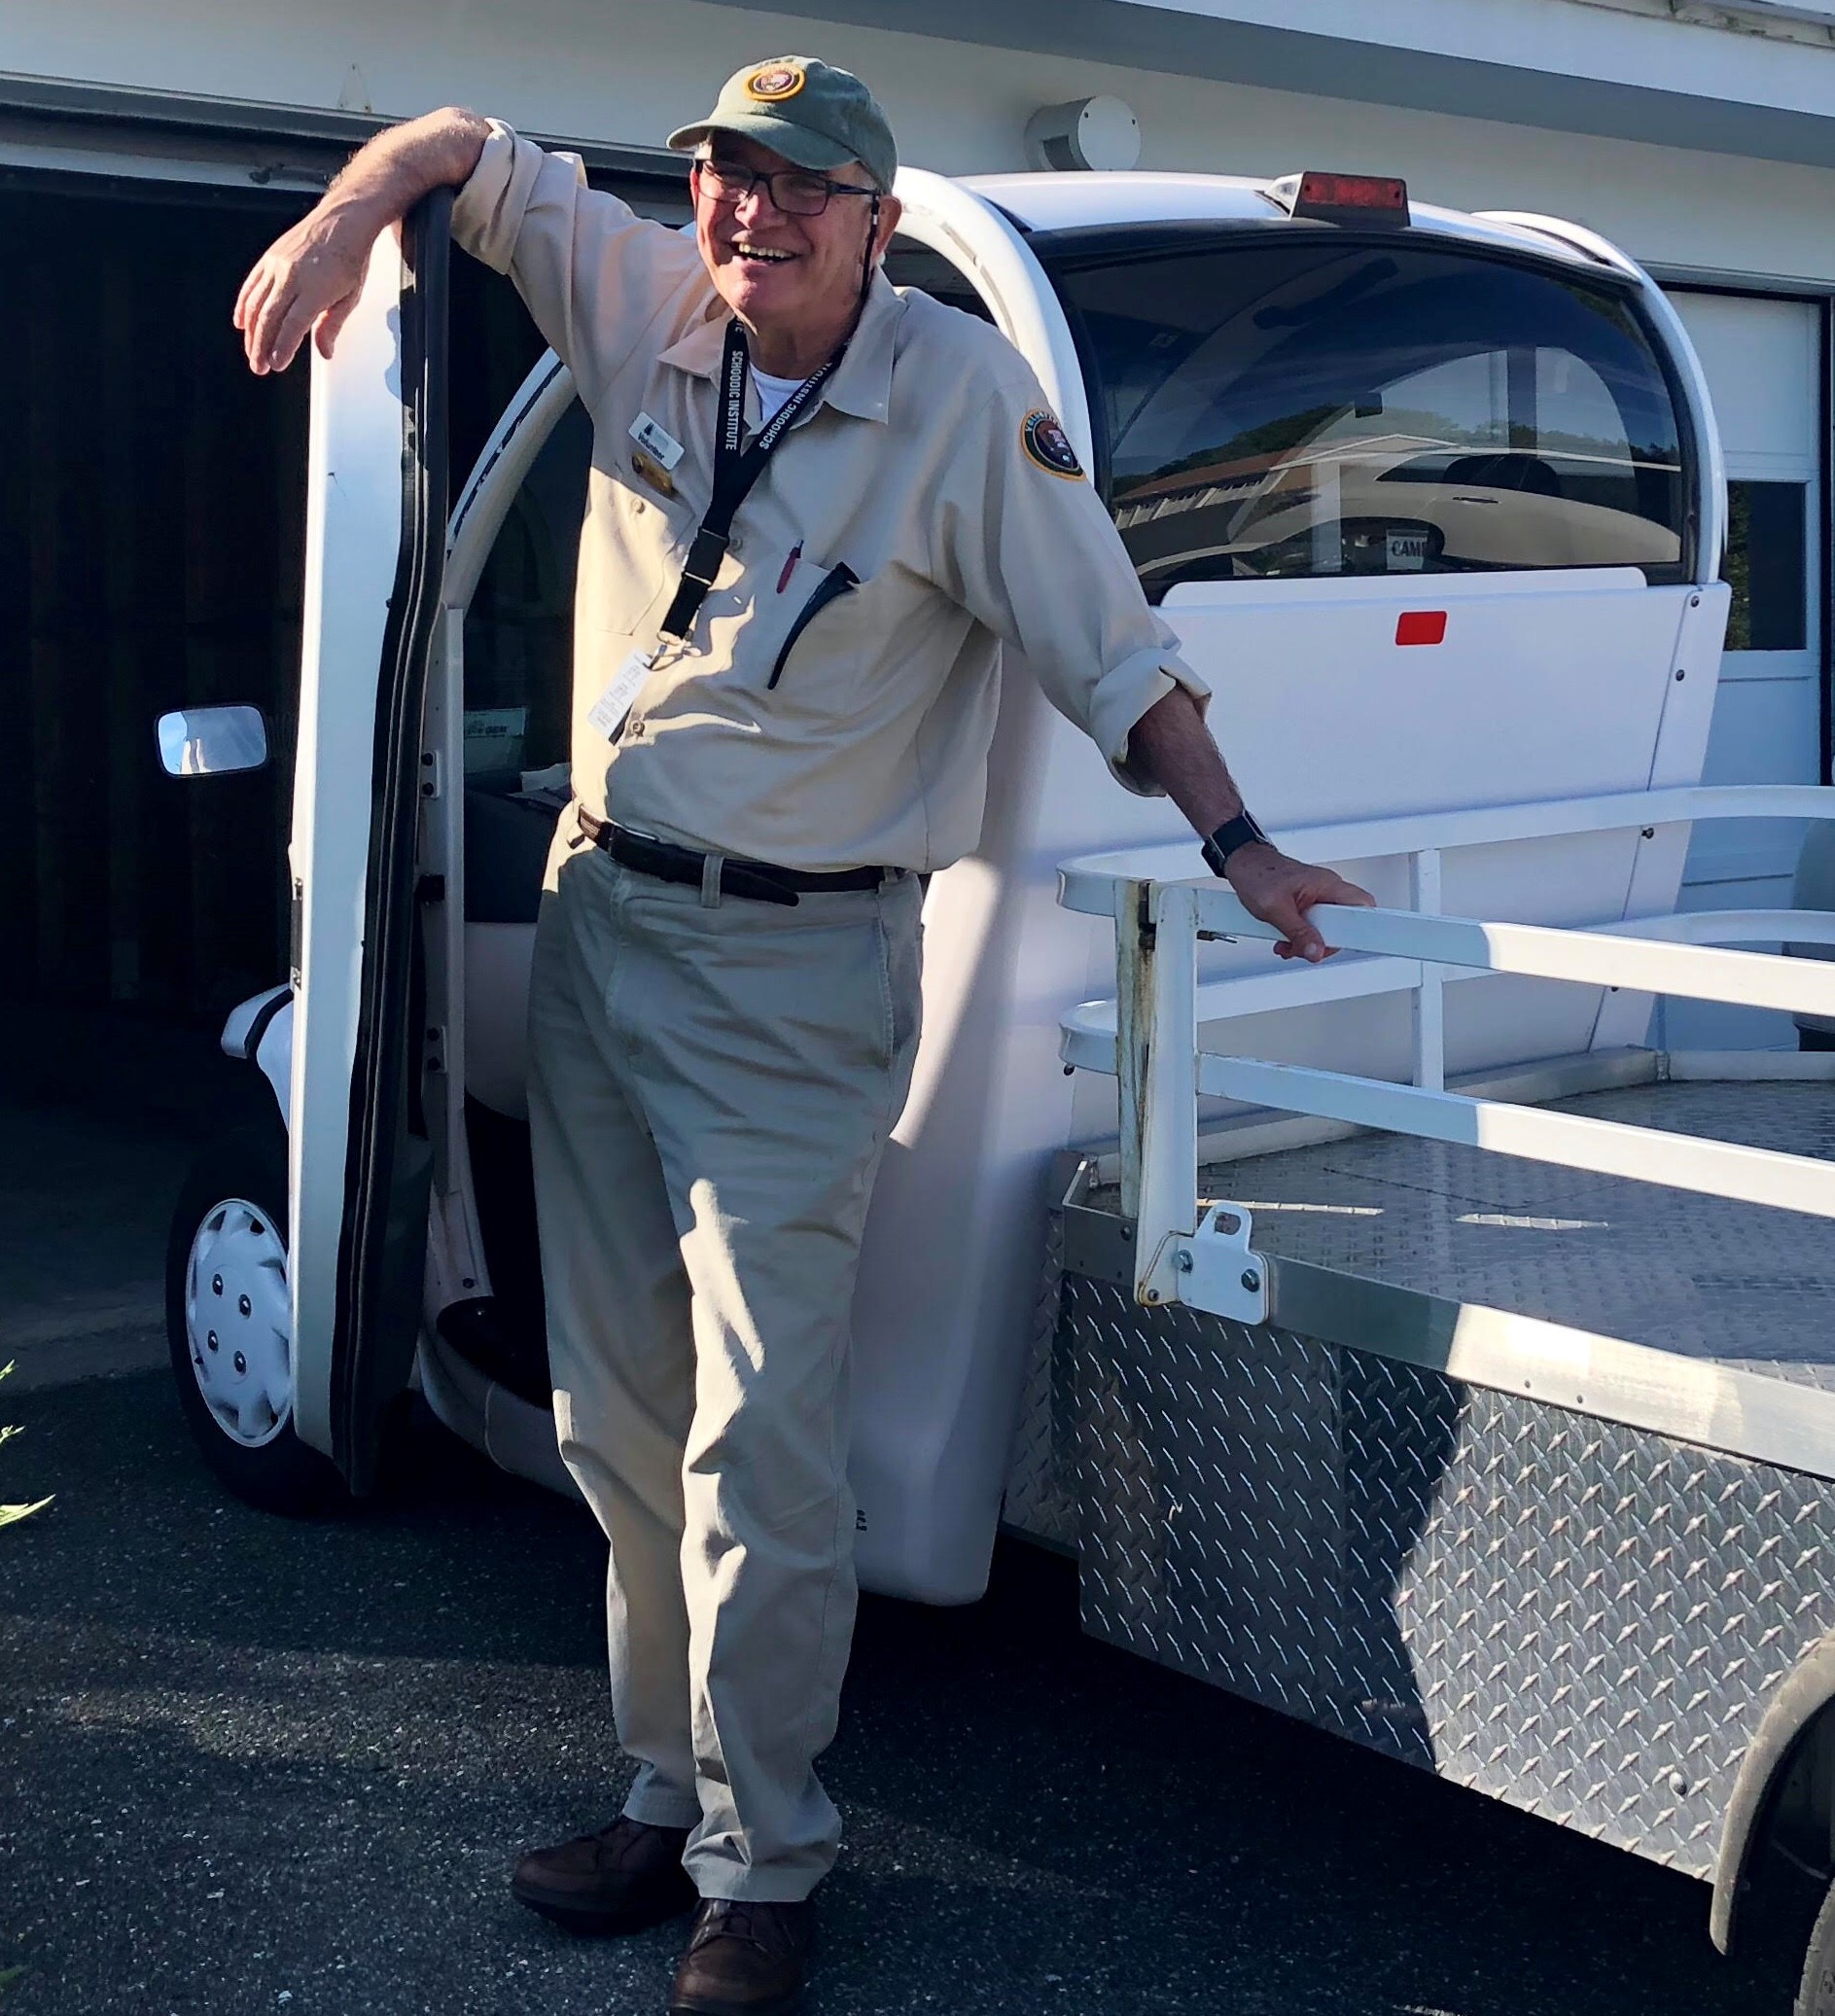 Volunteer Tommy Jarrett smiles at the camera as he stands leaning against the open doors of a small white electric vehicle. He is in his khaki colored uniform, is wearing a ball cap and glasses.